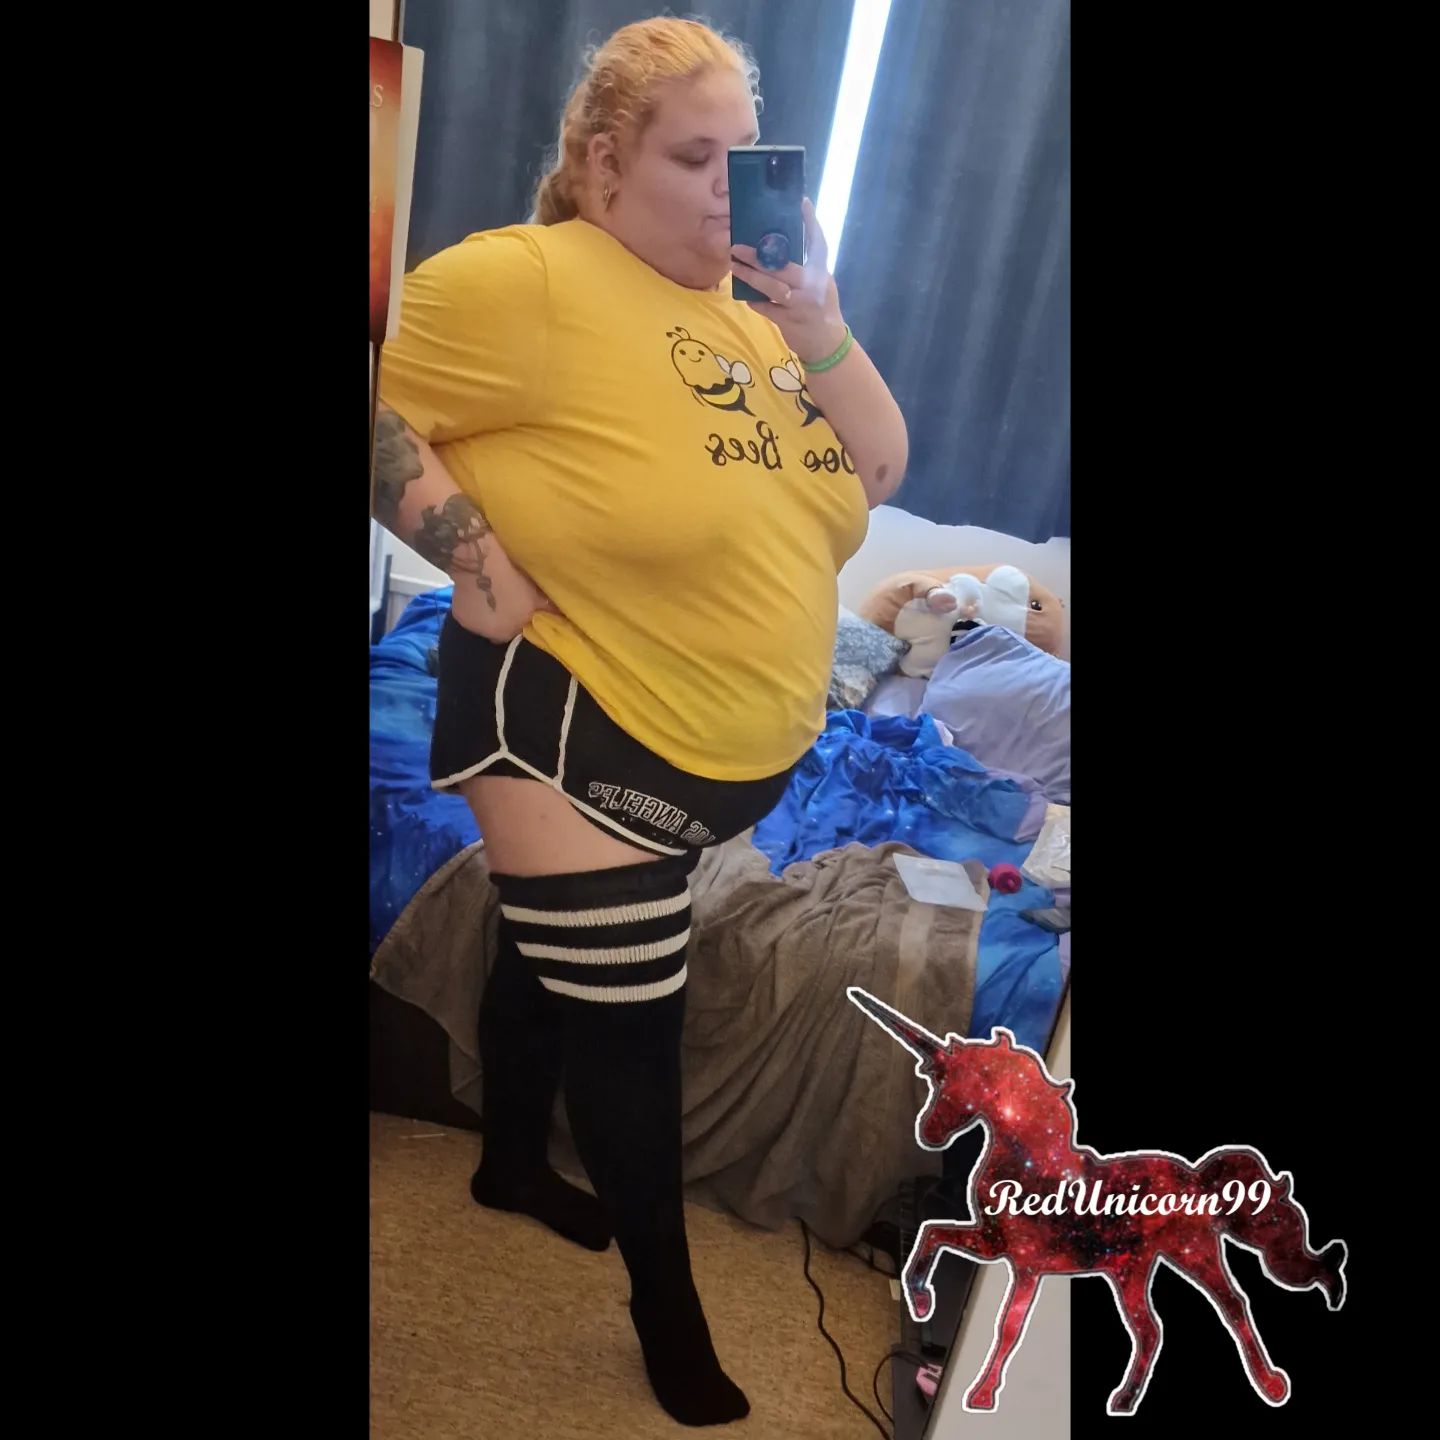 Love these thigh highs! Do you like thigh high socks? 🤔

#thighhighs #thighhighsocks #thundathighs #thickthighssavelives #thickwomen #thickthighlife #thickthighs #bbwappreciation #bbwlove #bbw #plussizefashion #plussize #plussizeoutfit #tattoos #ssbbw #mirrorselfie